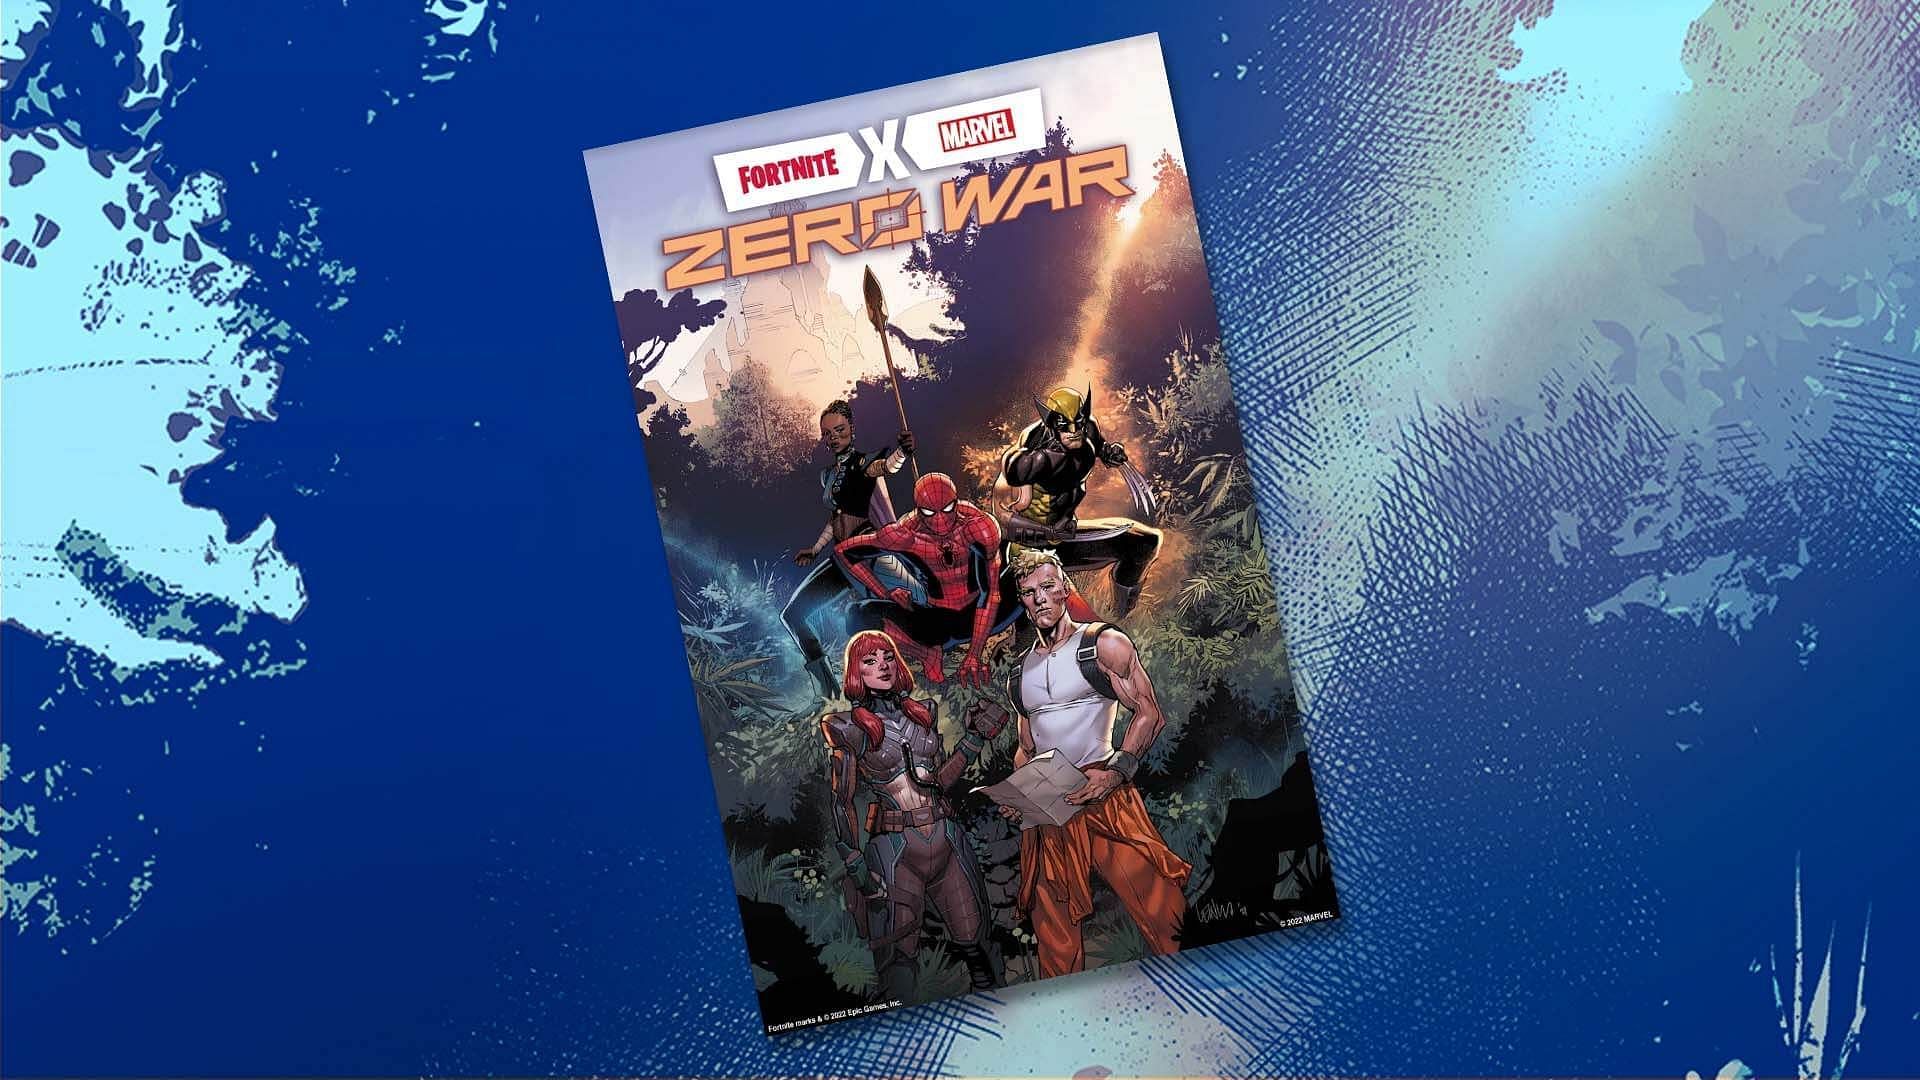 Fortnite x Marvel: Zero War comics reveal many details about the game's characters (Image via Epic Games)